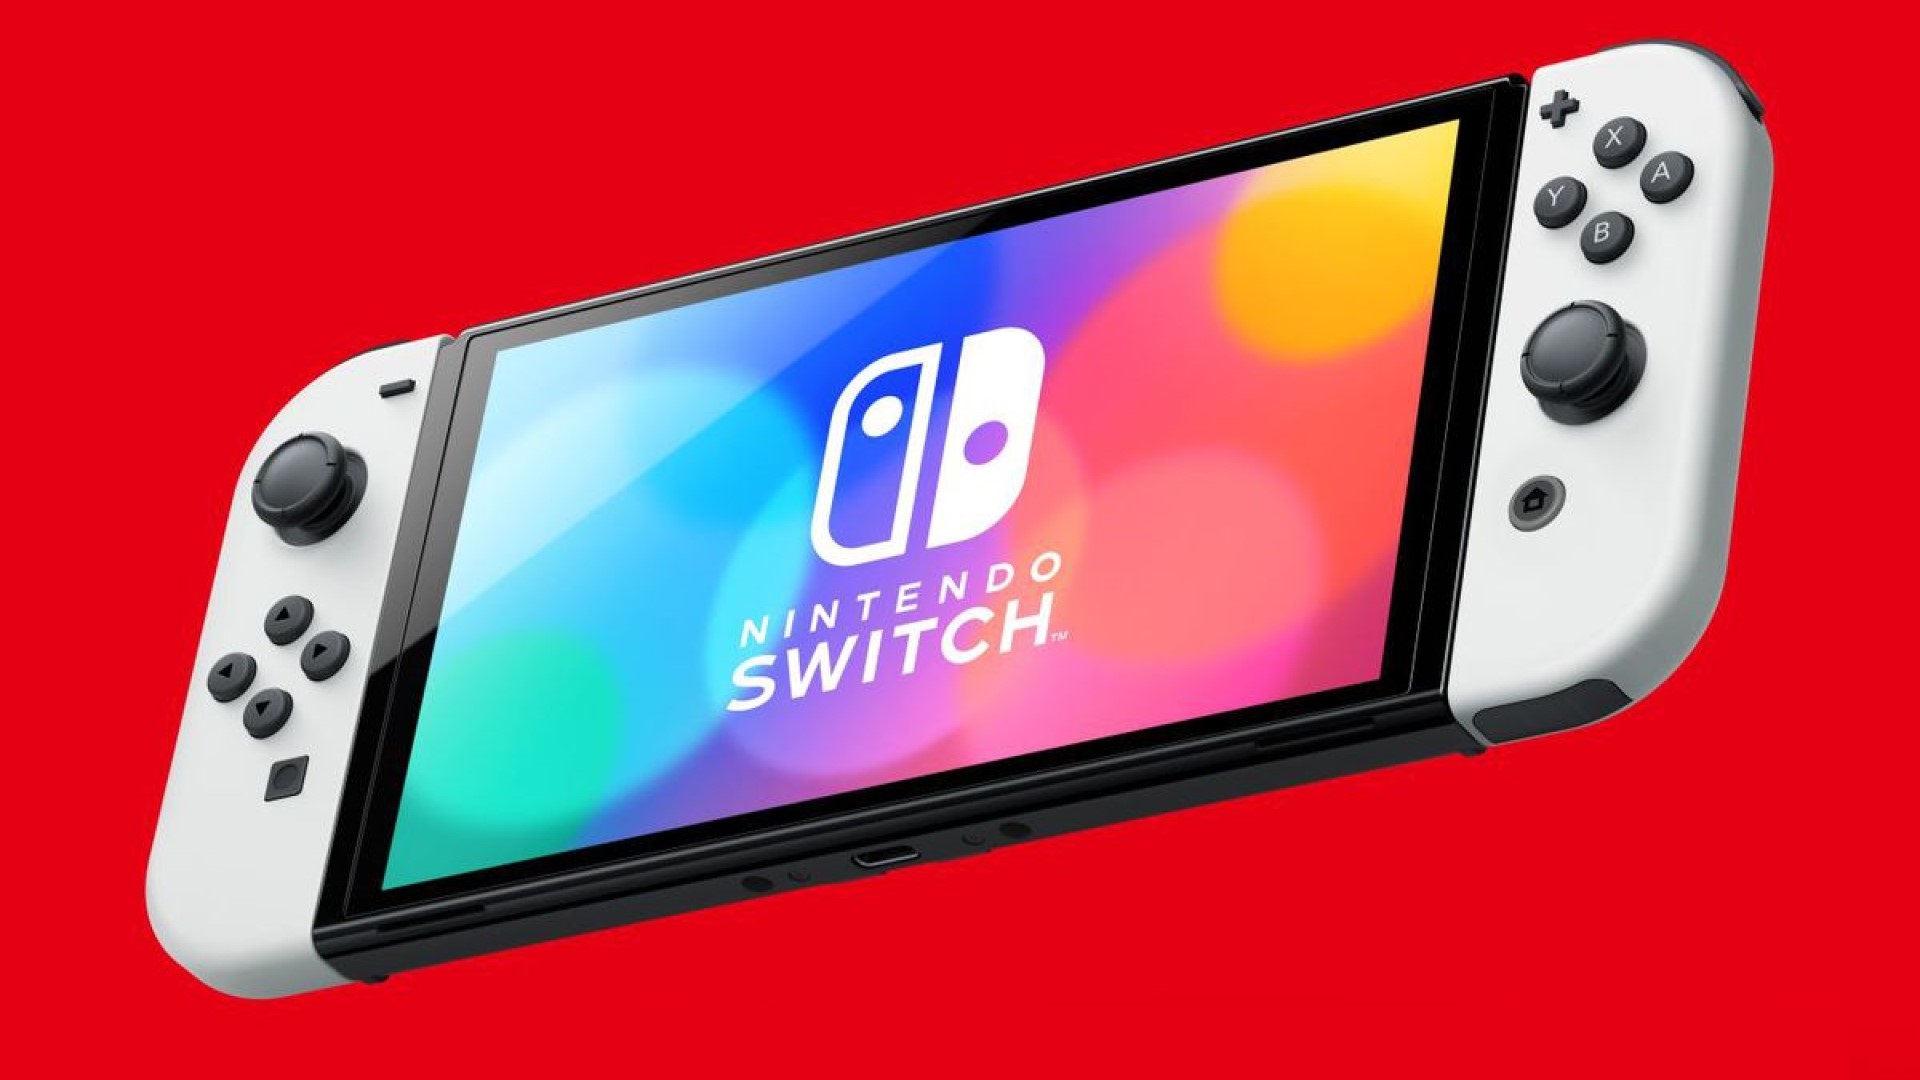 Nintend Switch Reportedly Enjoyed its Highest-Selling June in Japan to Date